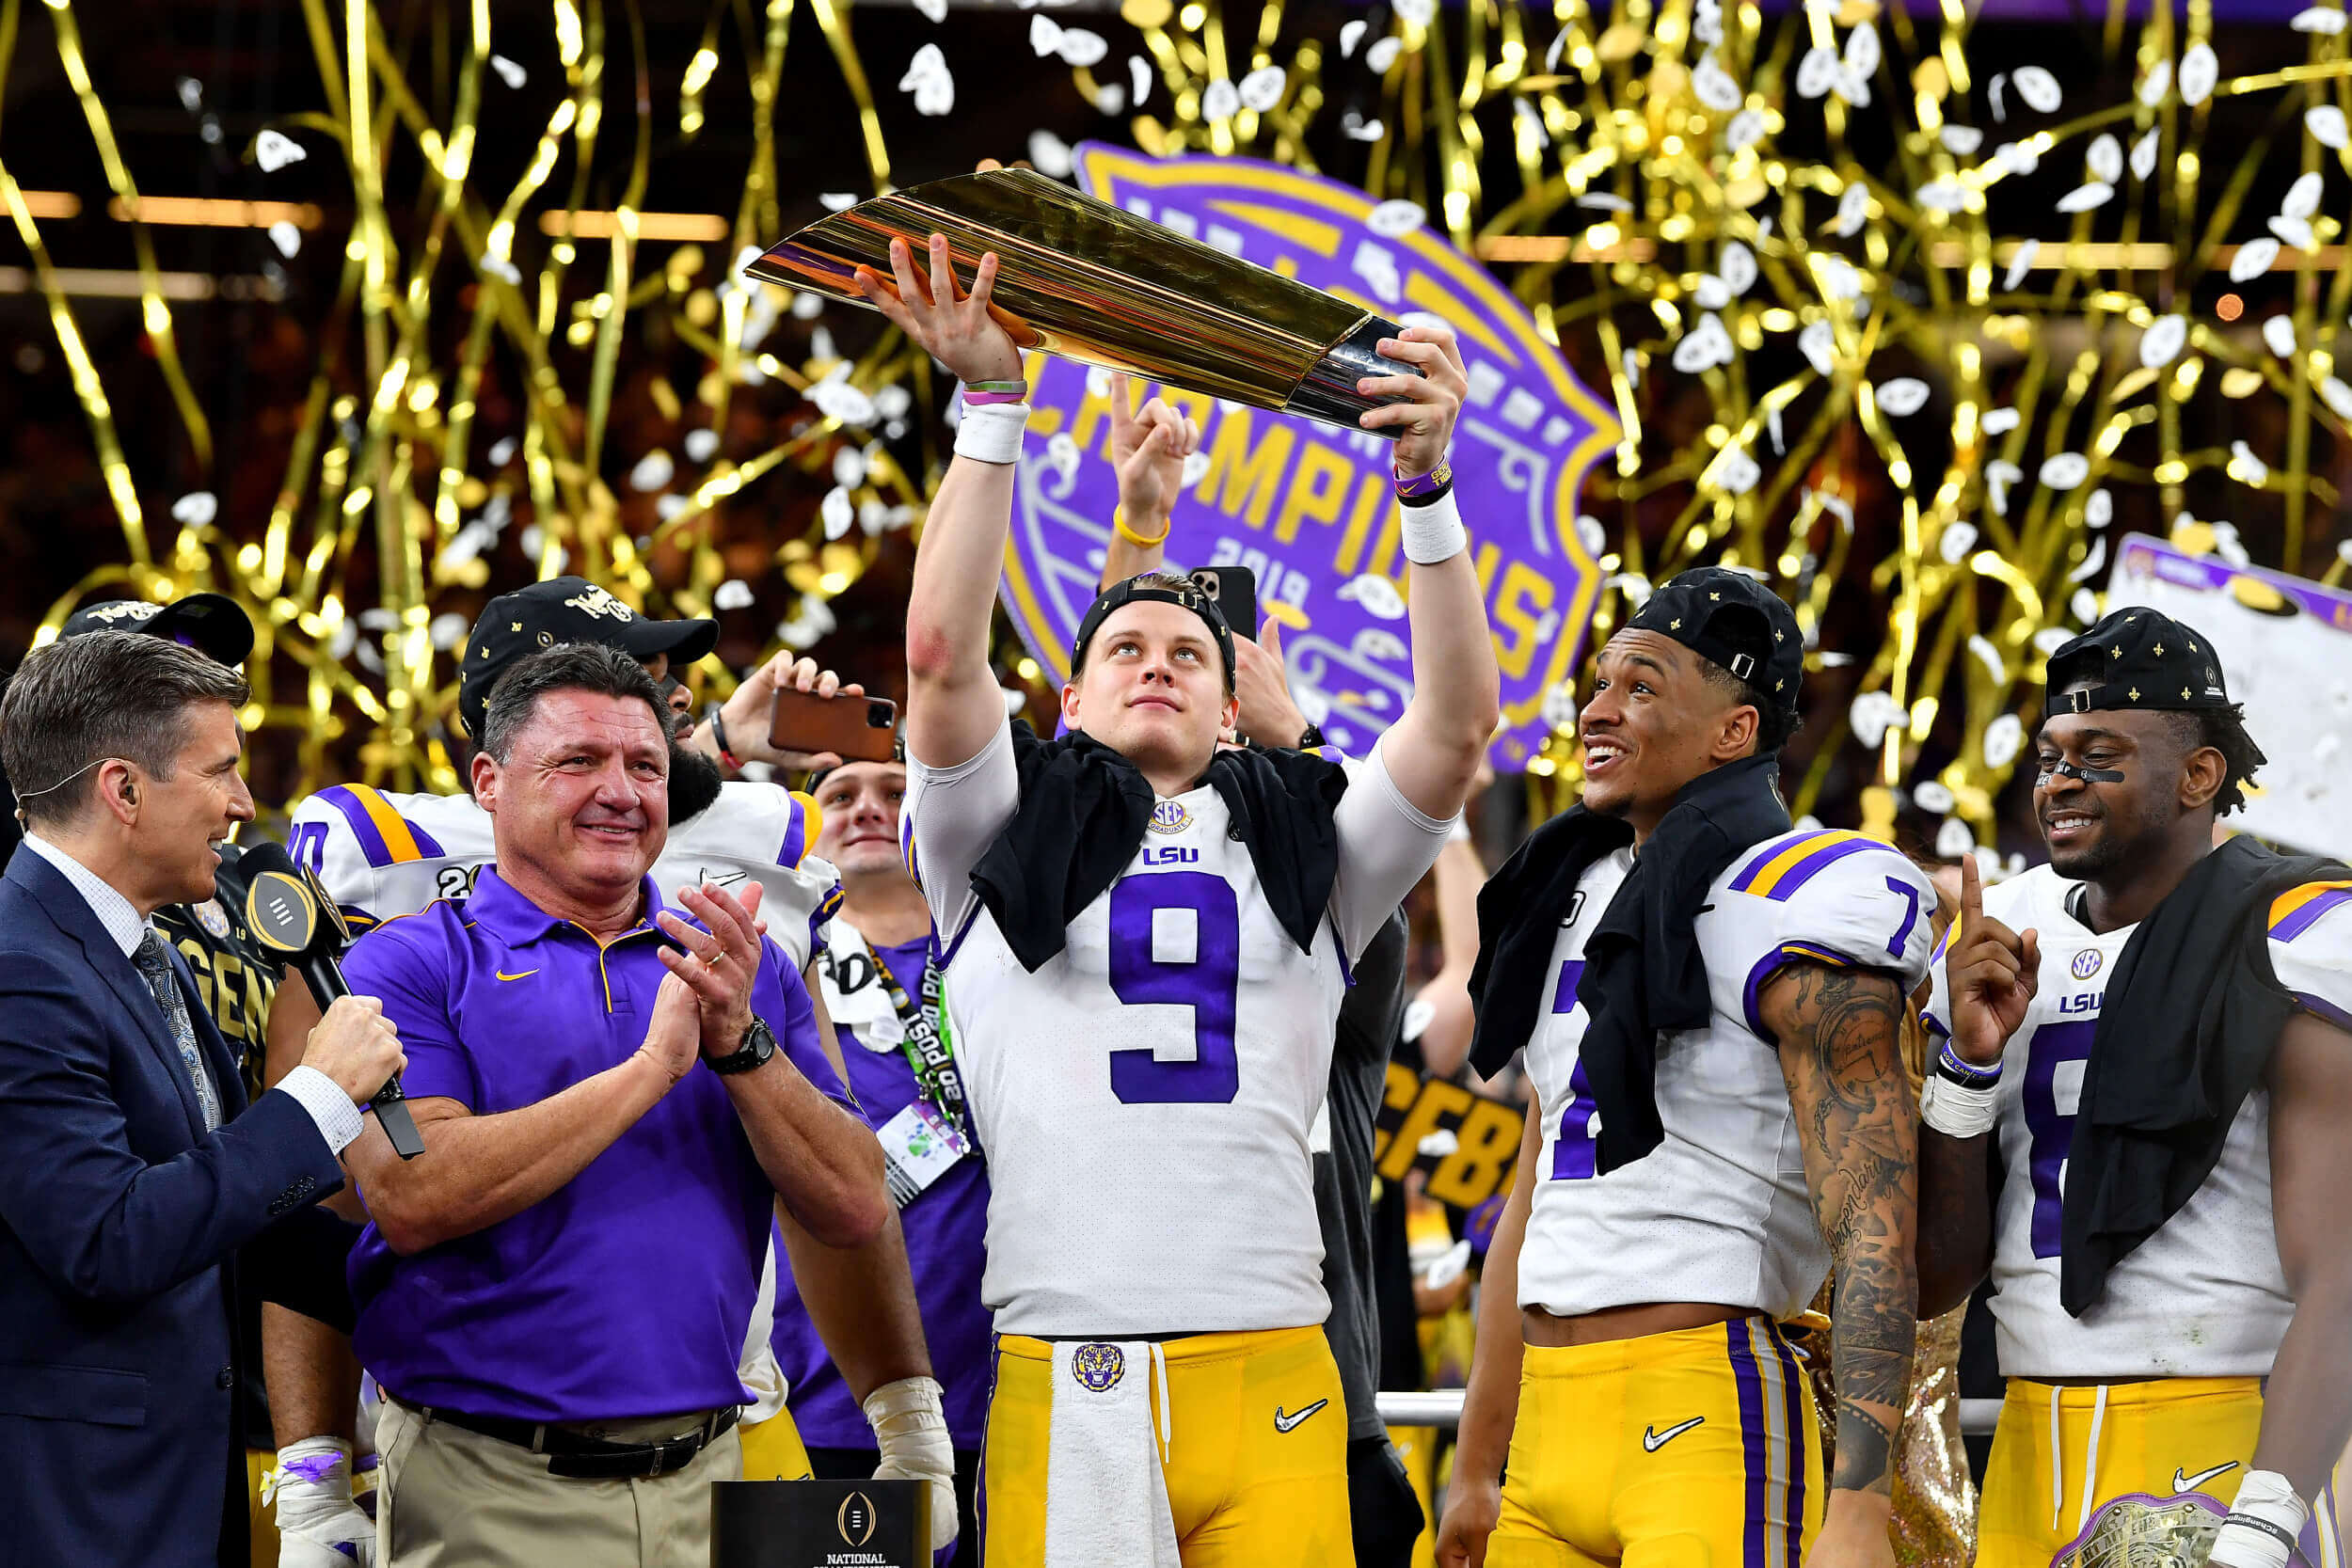 All You Need to Know about LSU's Title Parade on Saturday